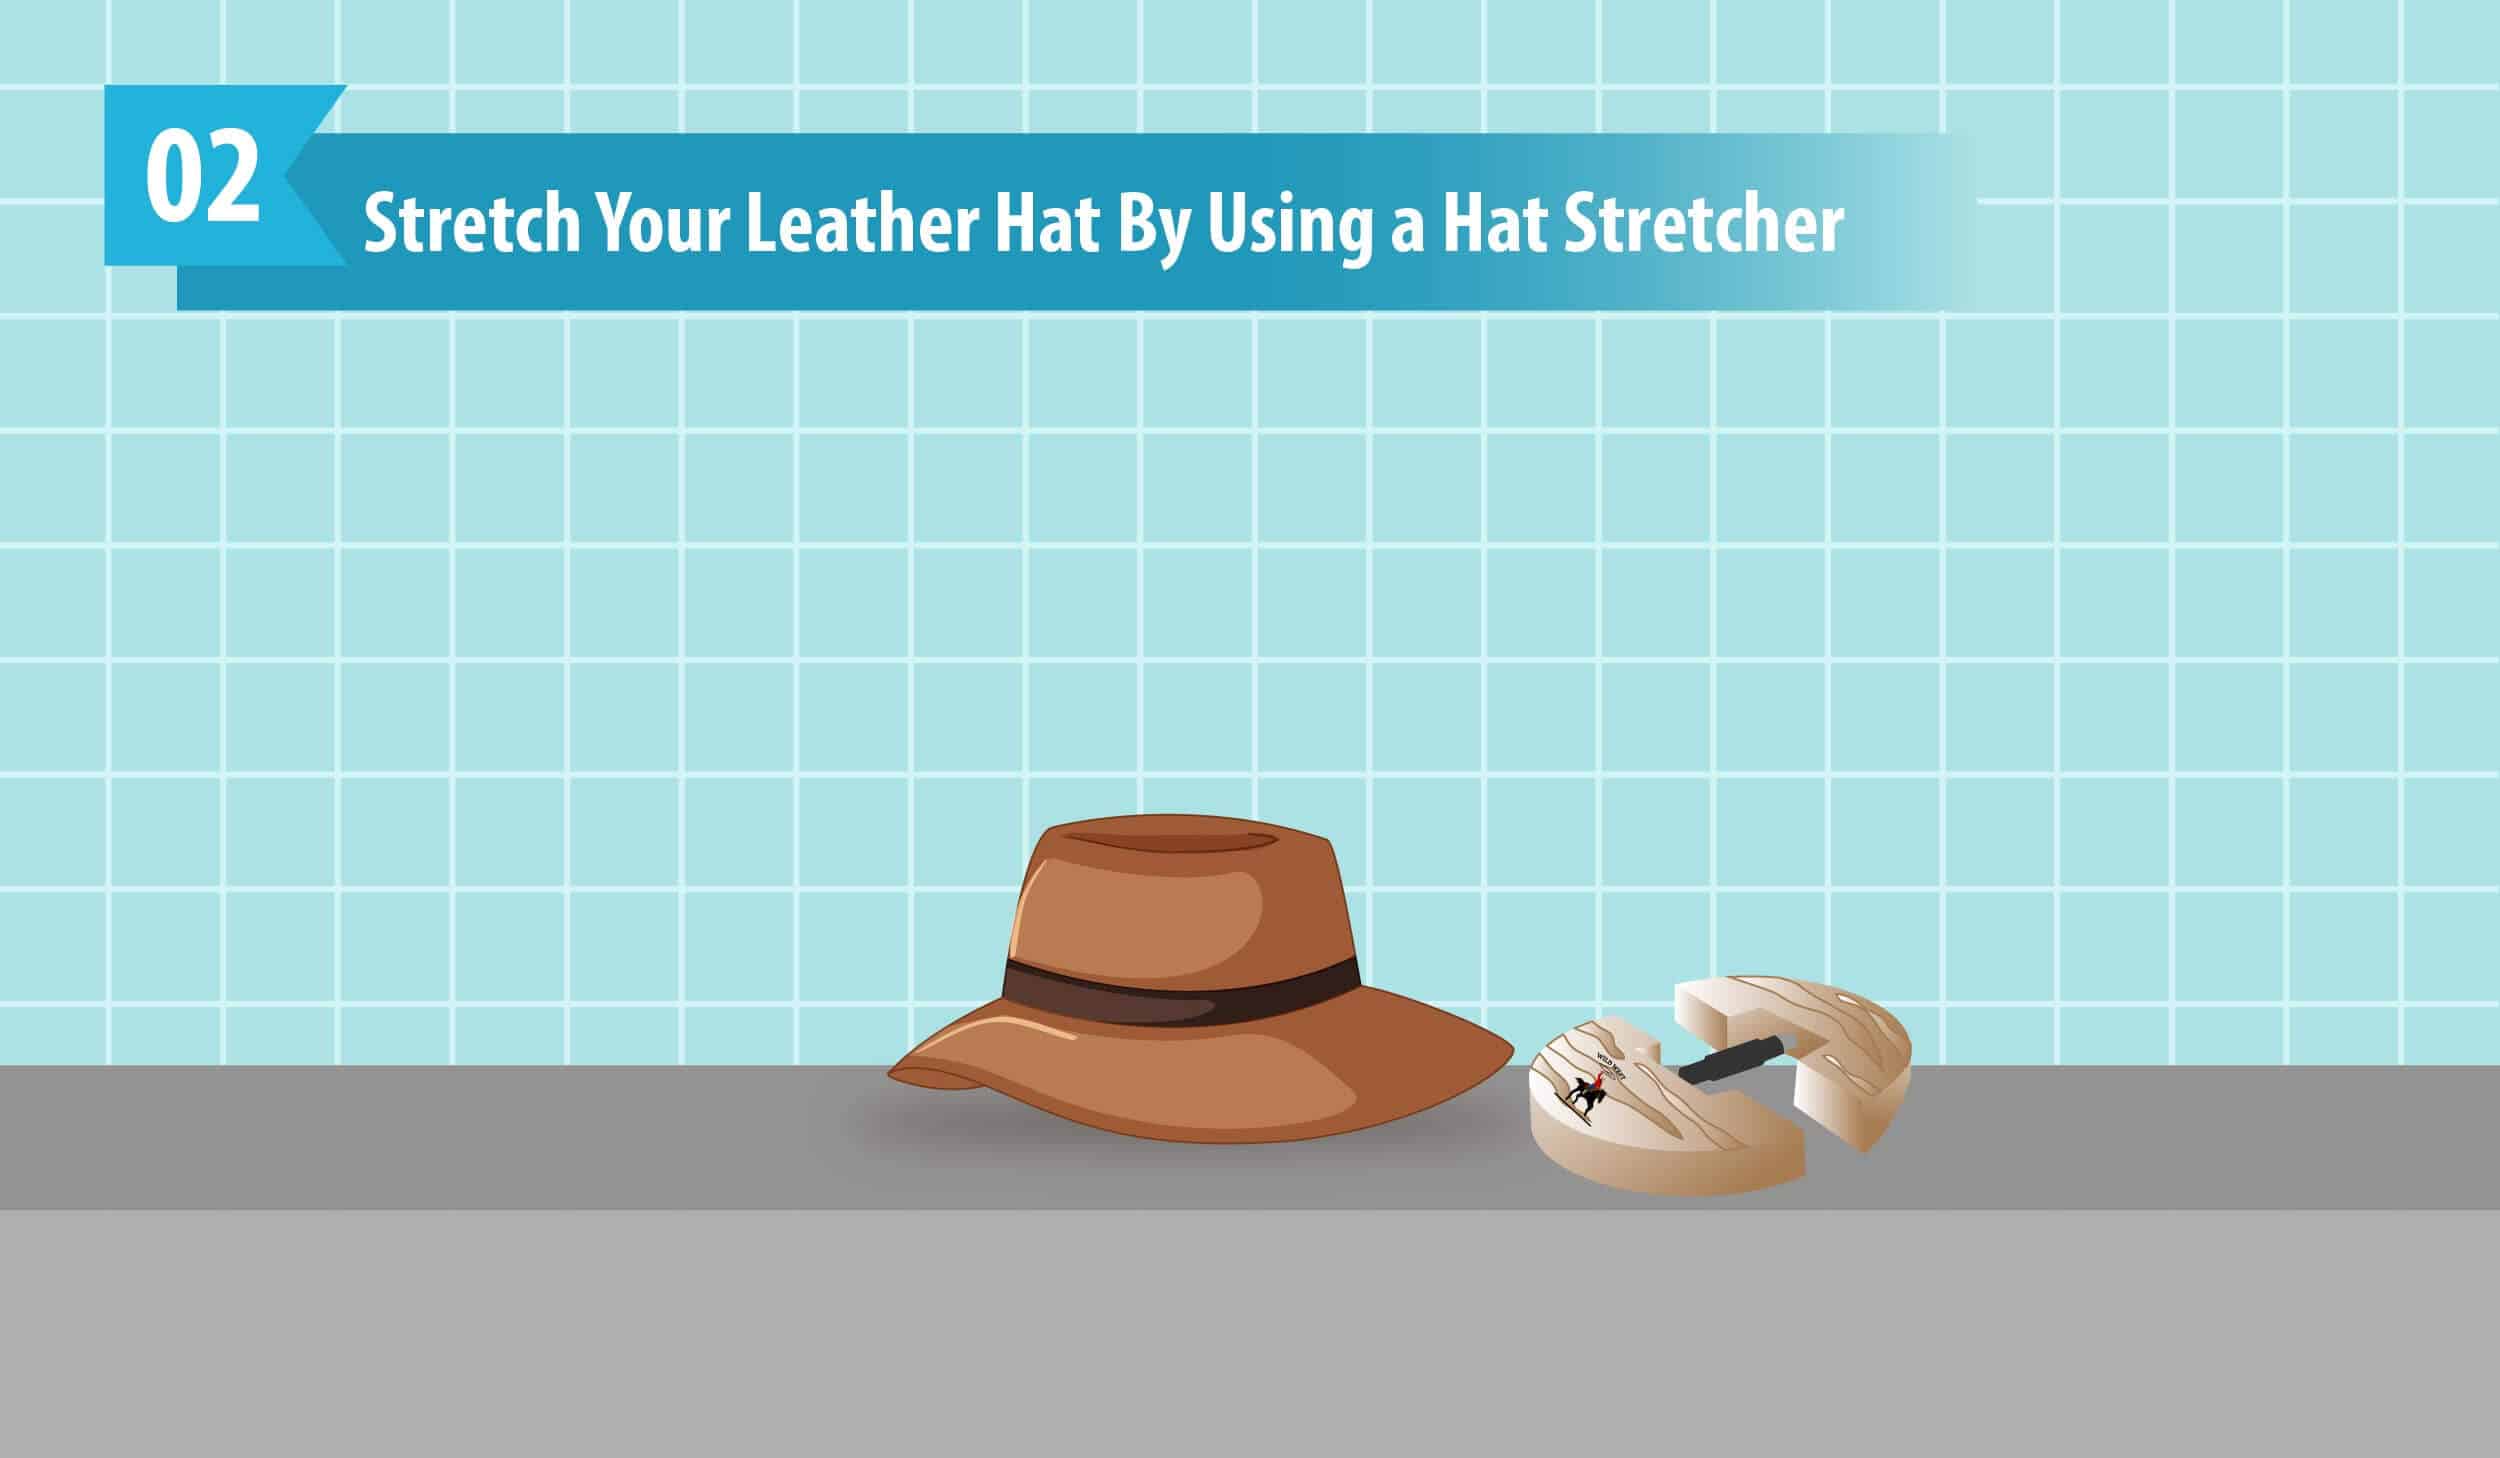 Stretch Your Leather Hat By Using a Hat Stretcher